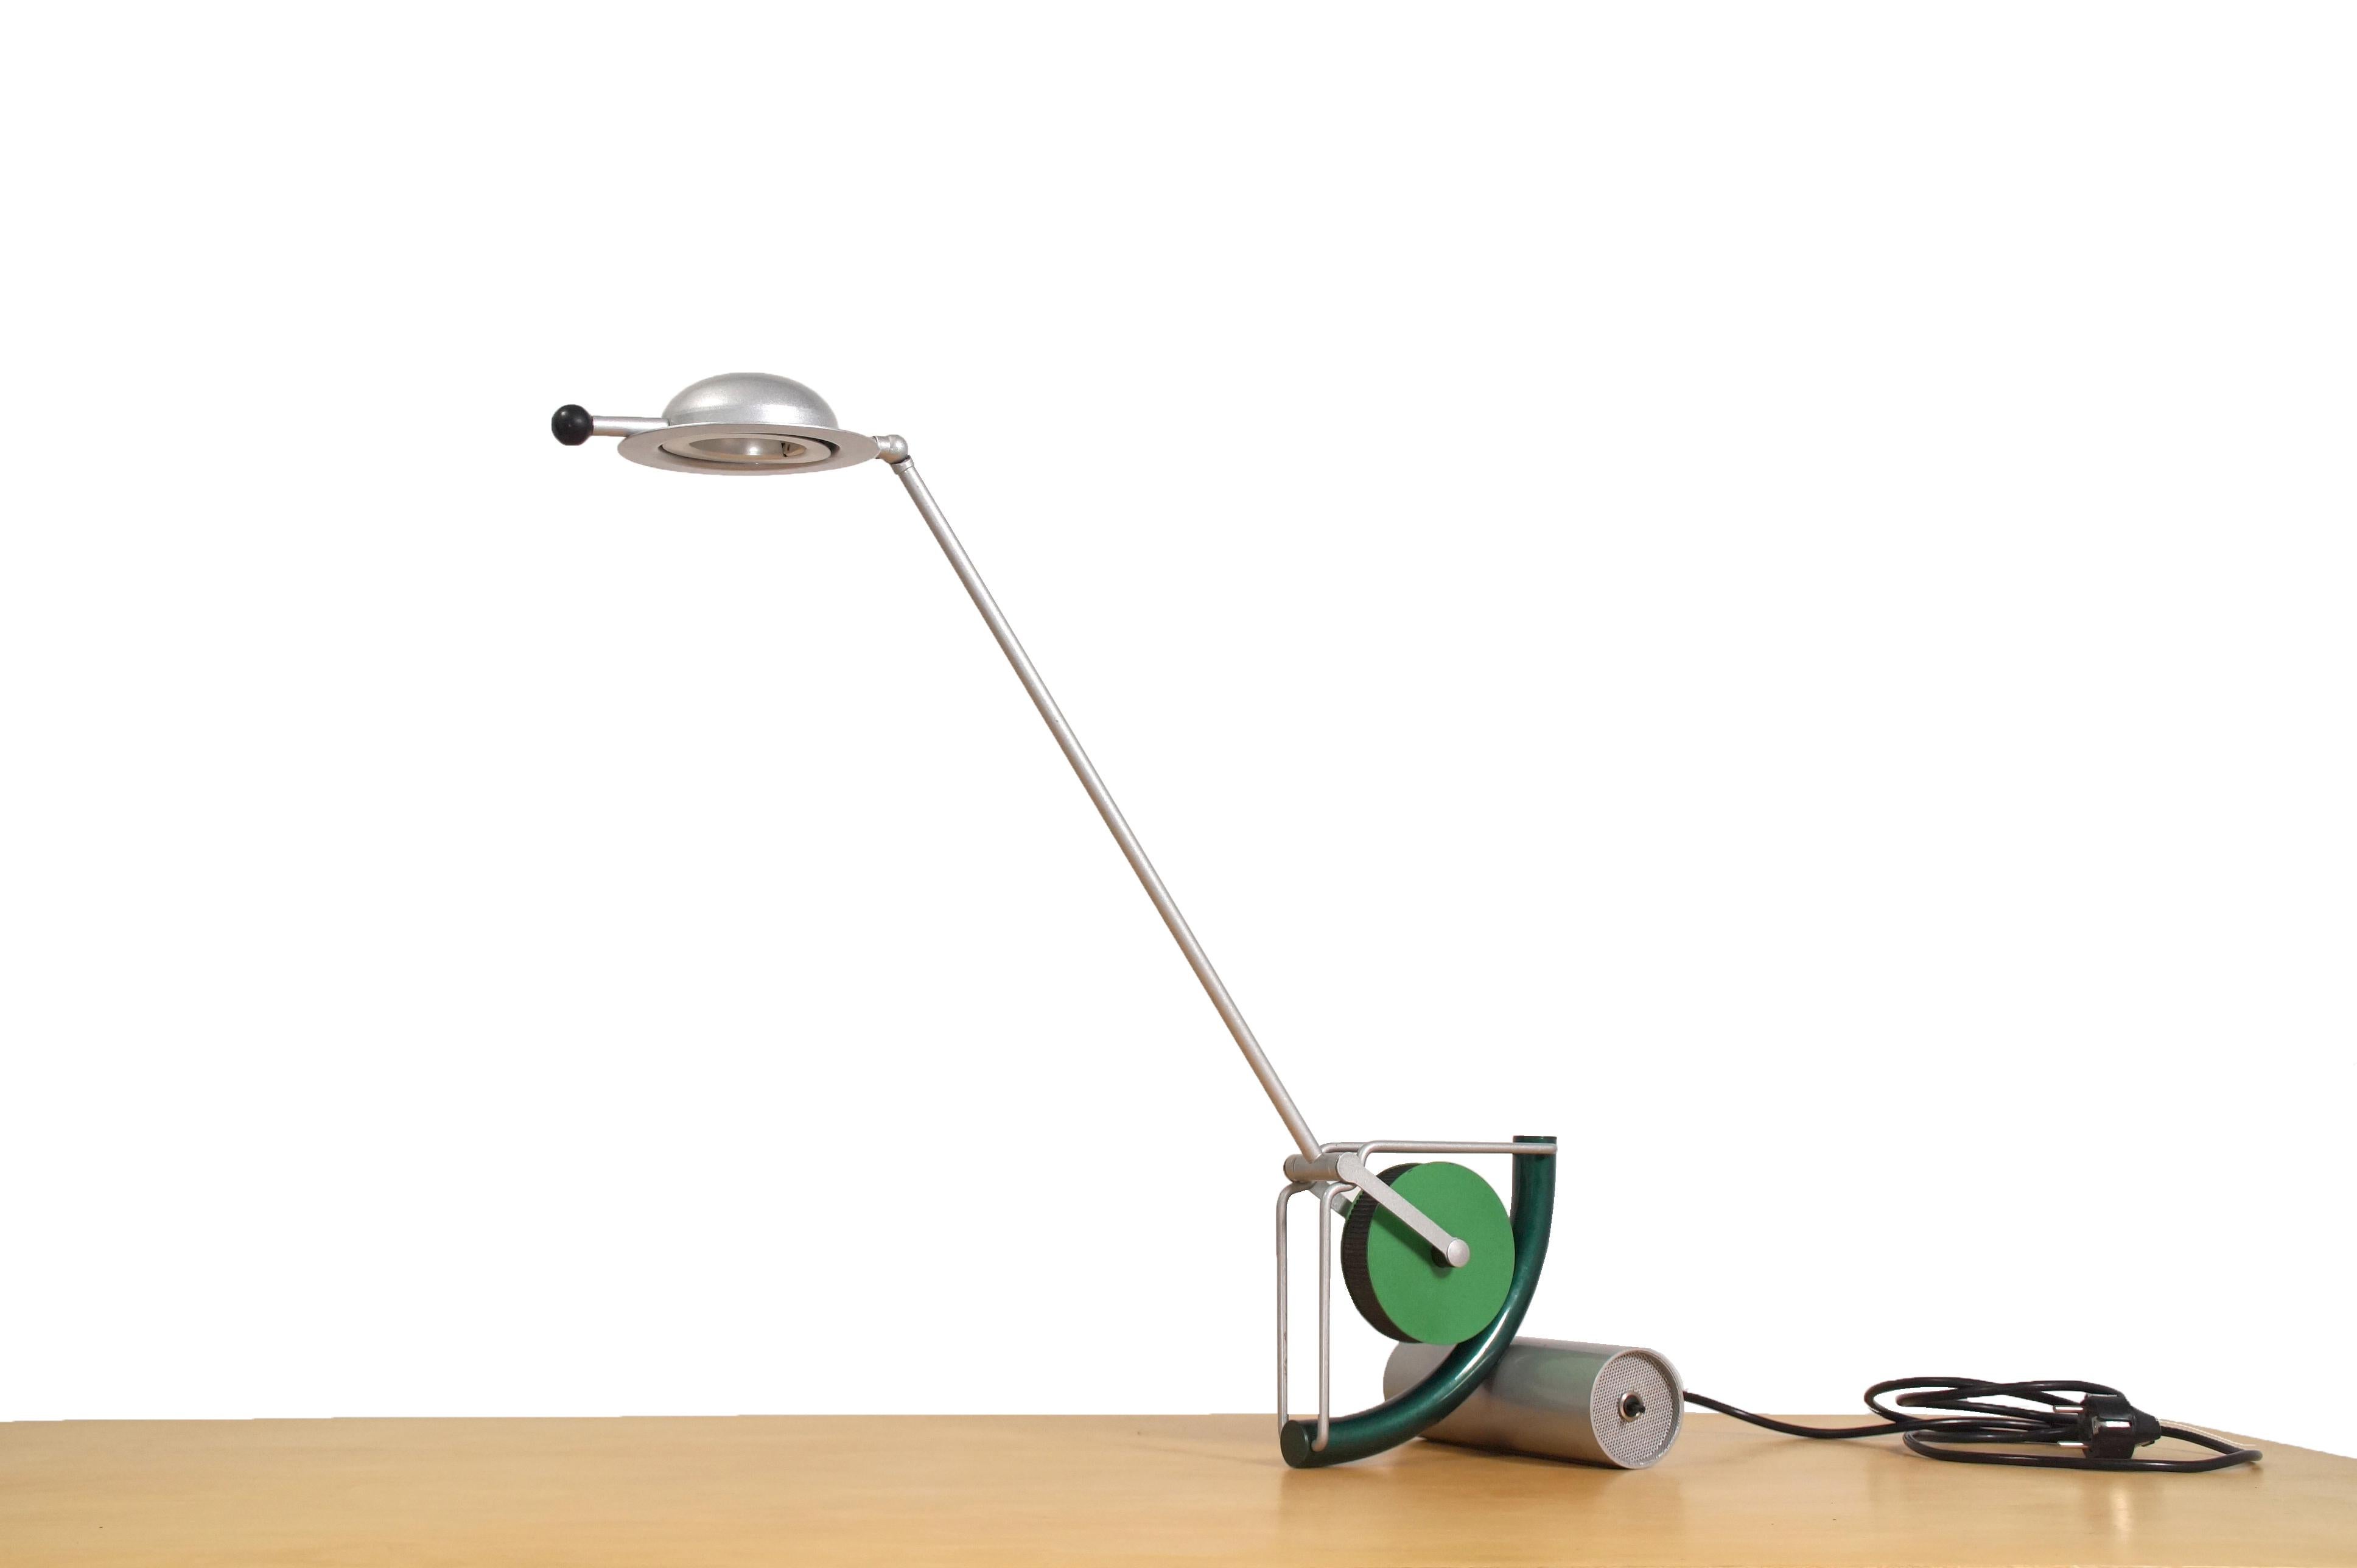 Rare Giddon desk lamp, designed by Martine Bedin in 1985.

A wonderful example of the postmodern lighting is this overly rare Gideon lamp. It is manufactured by Italian Manufacturer Megalit in 1985.

The design shows various of Martine Bedin‘s